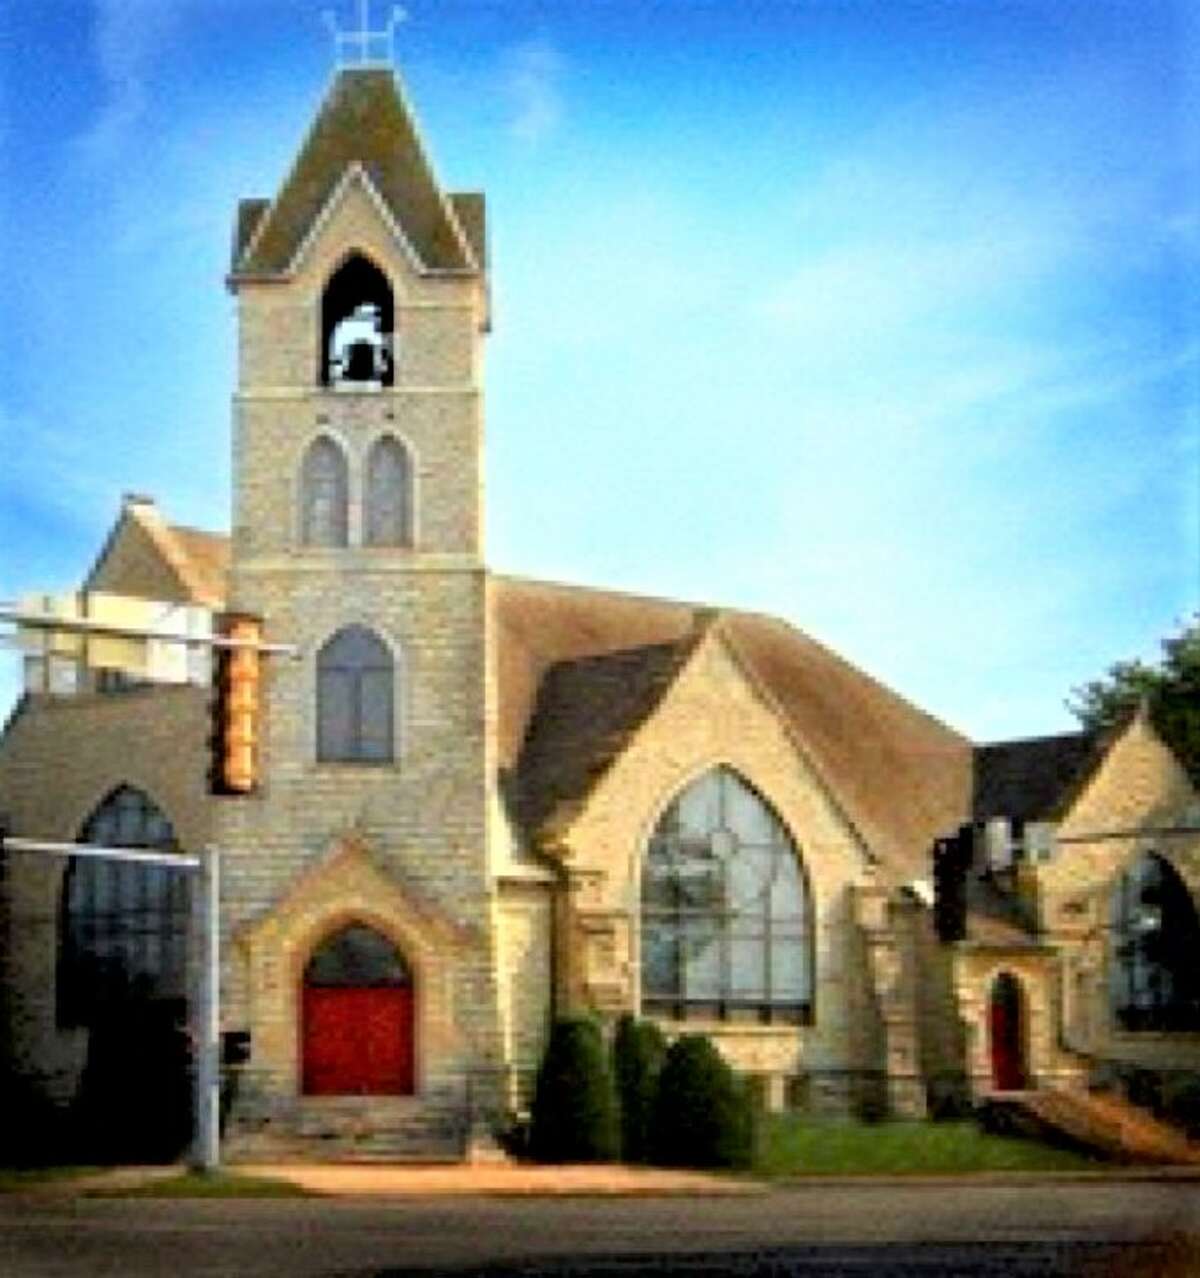 Jerseyville First Presbyterian Church has been added to the National Register of Historic Places.